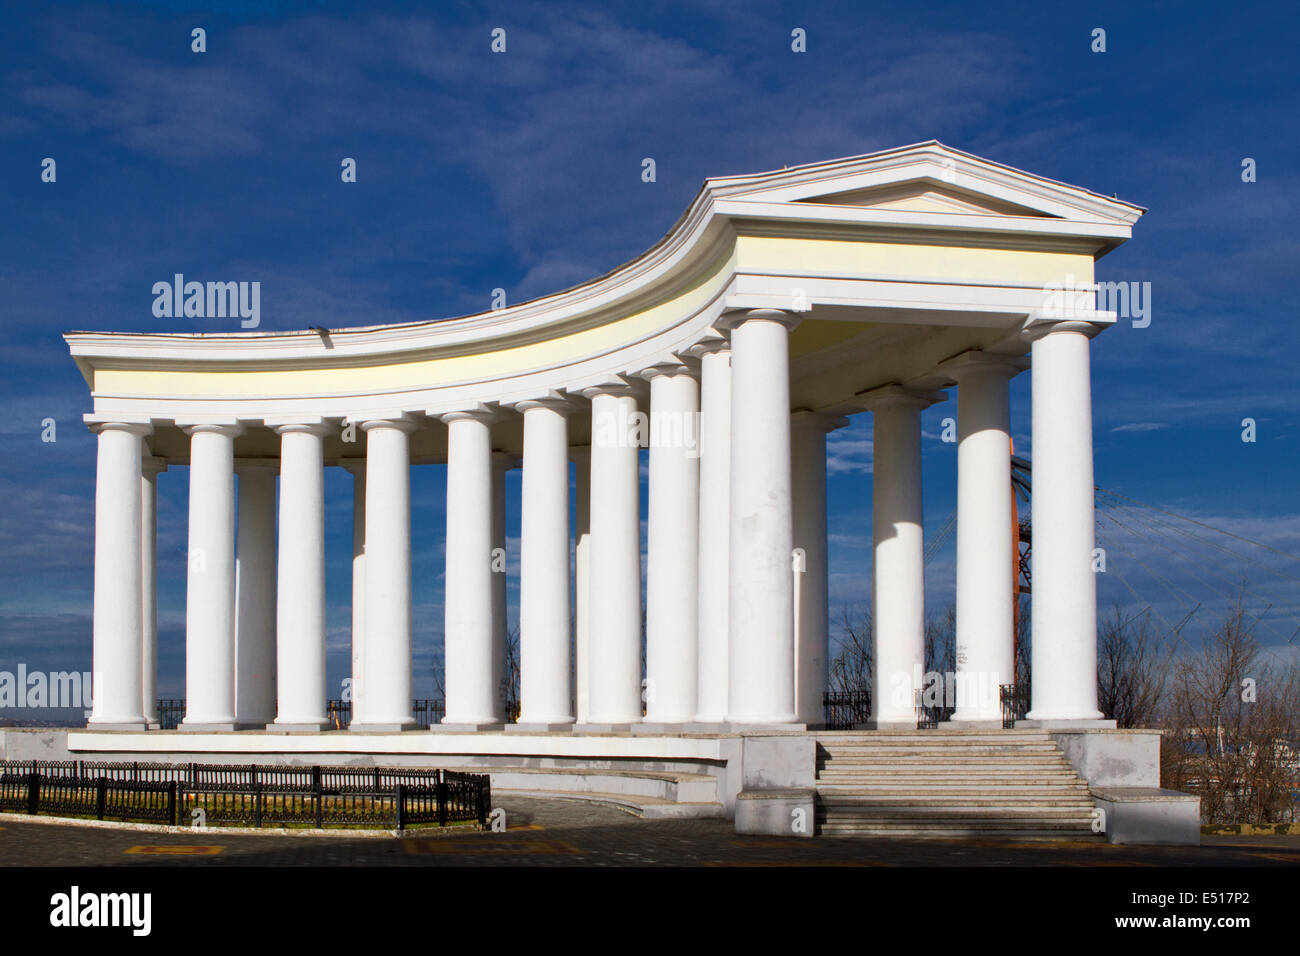 Colonnade at Vorontsov Palace in Odessa Stock Photo